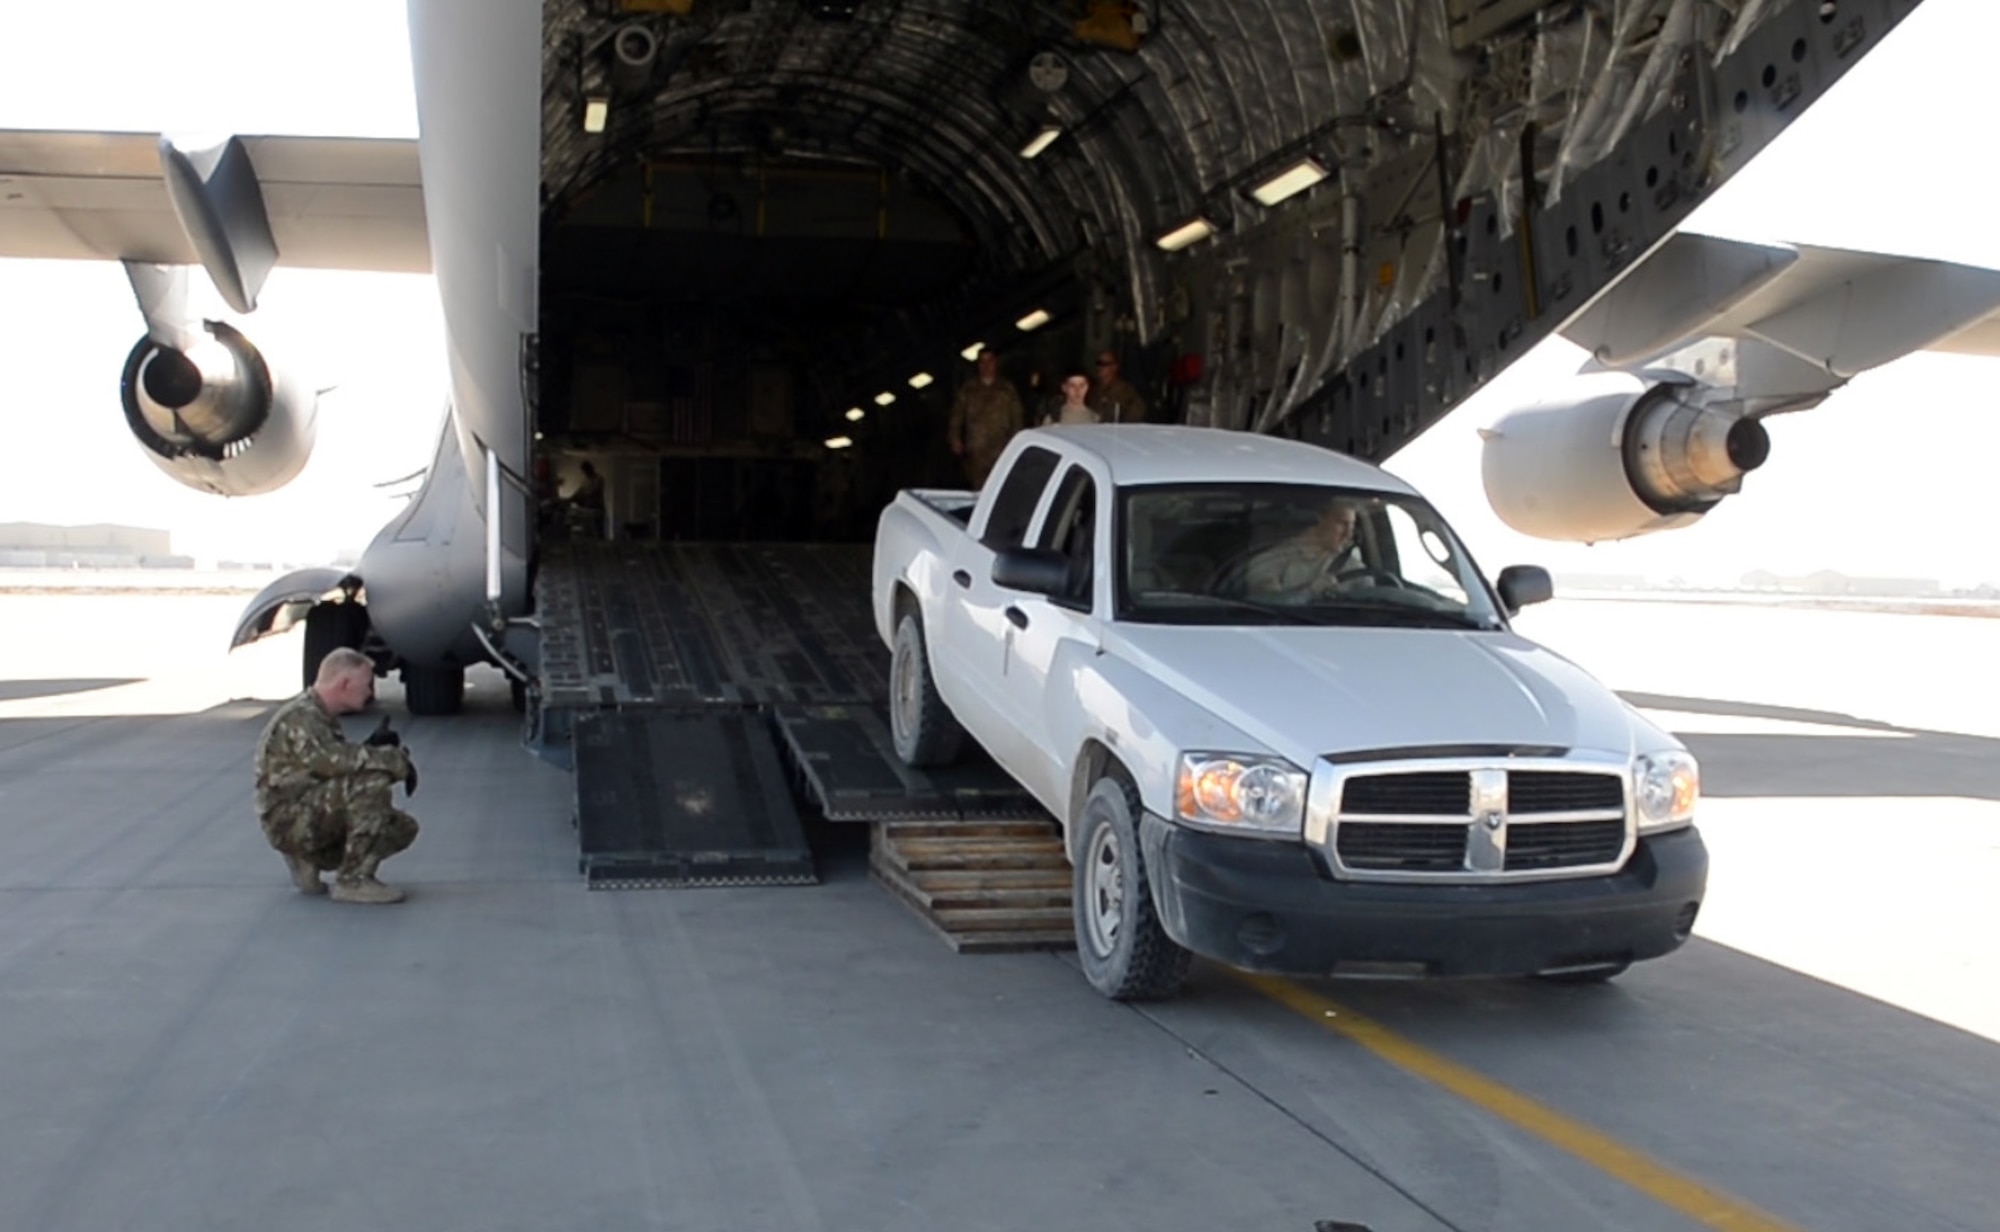 Airmen of the 455th Expeditionary Logistics Readiness Squadron central command material recovery element load a pick-up truck onto a C-17 Globemaster III Feb. 17, 2018 at Bagram Airfield, Afghanistan.